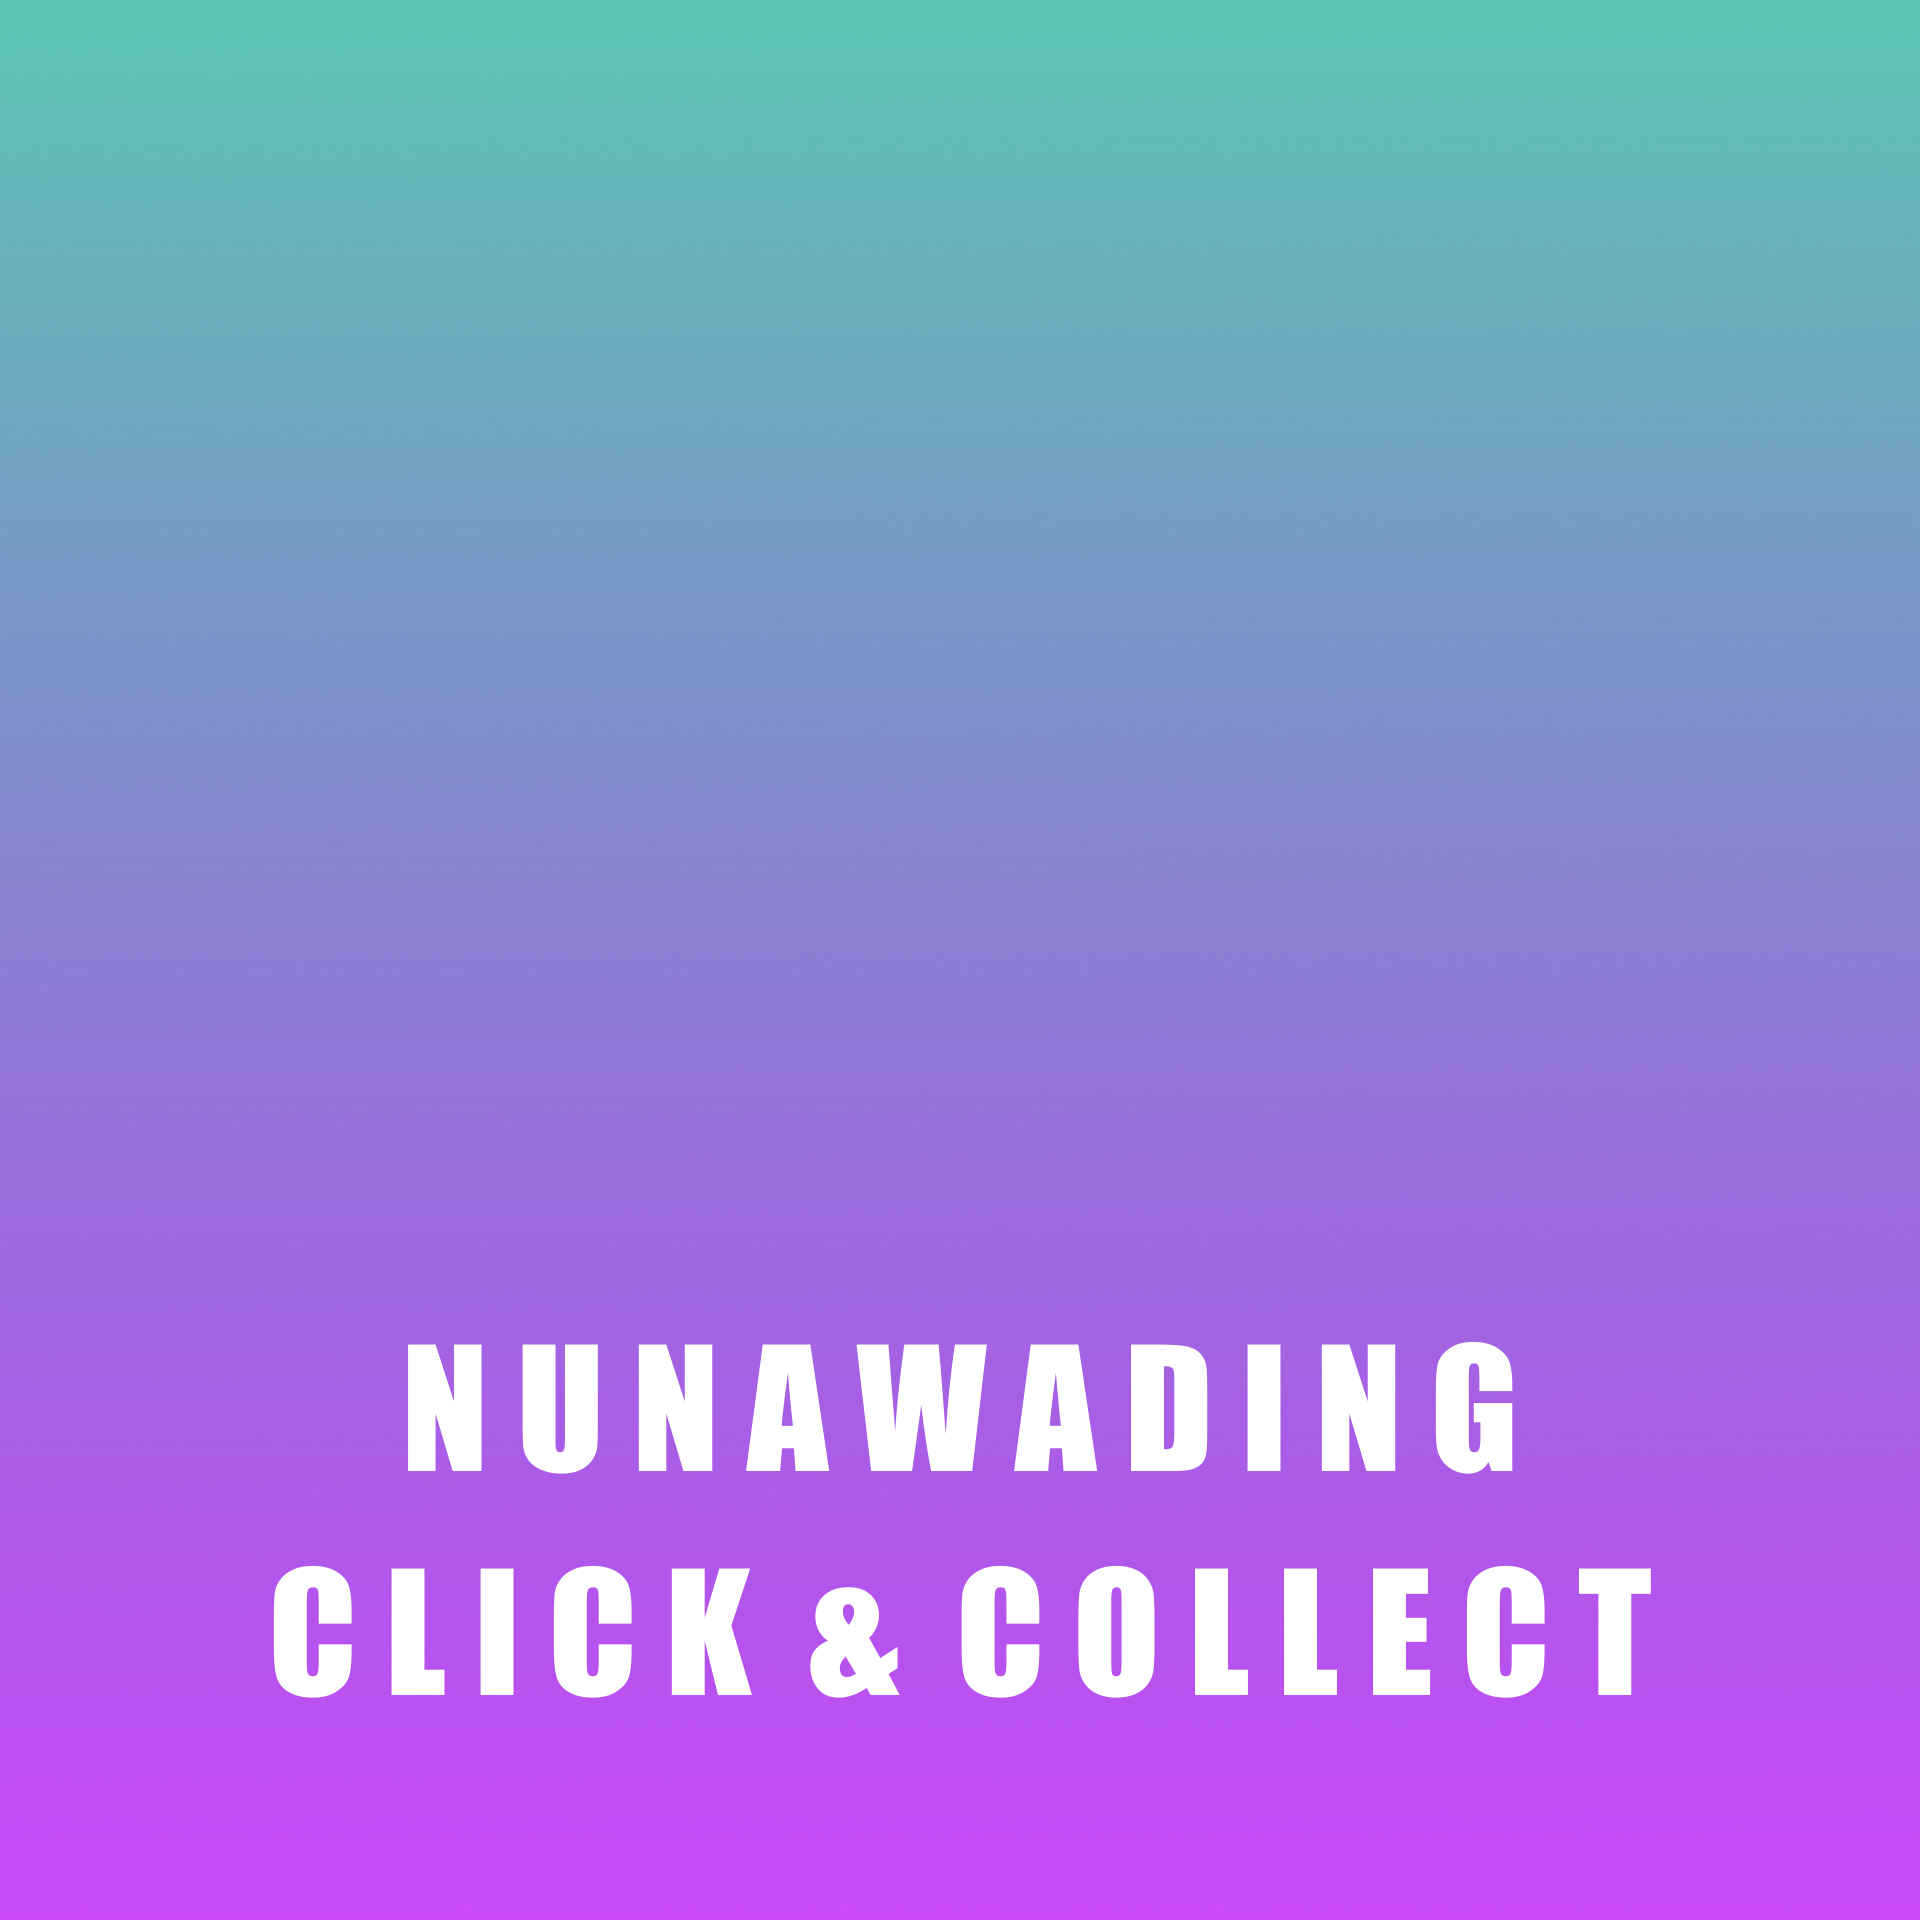 Super Fast Click & Collect Is Available At Our Nunawading Vape Shop!